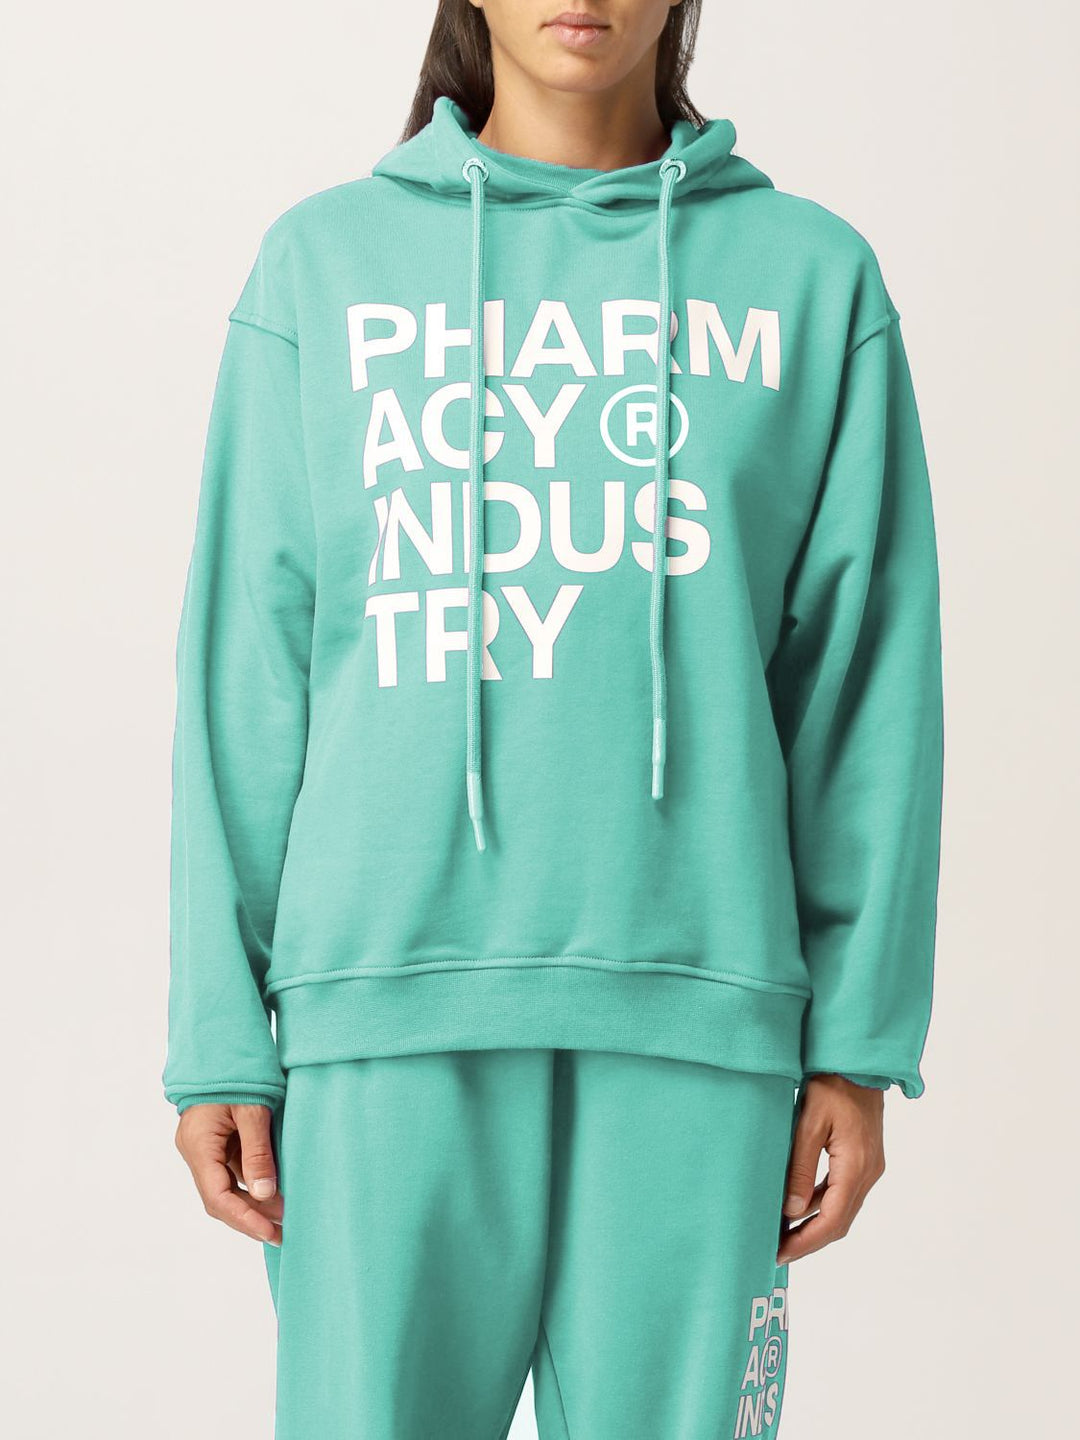 Pharmacy Industry Chic Mint Green Cotton Jacket